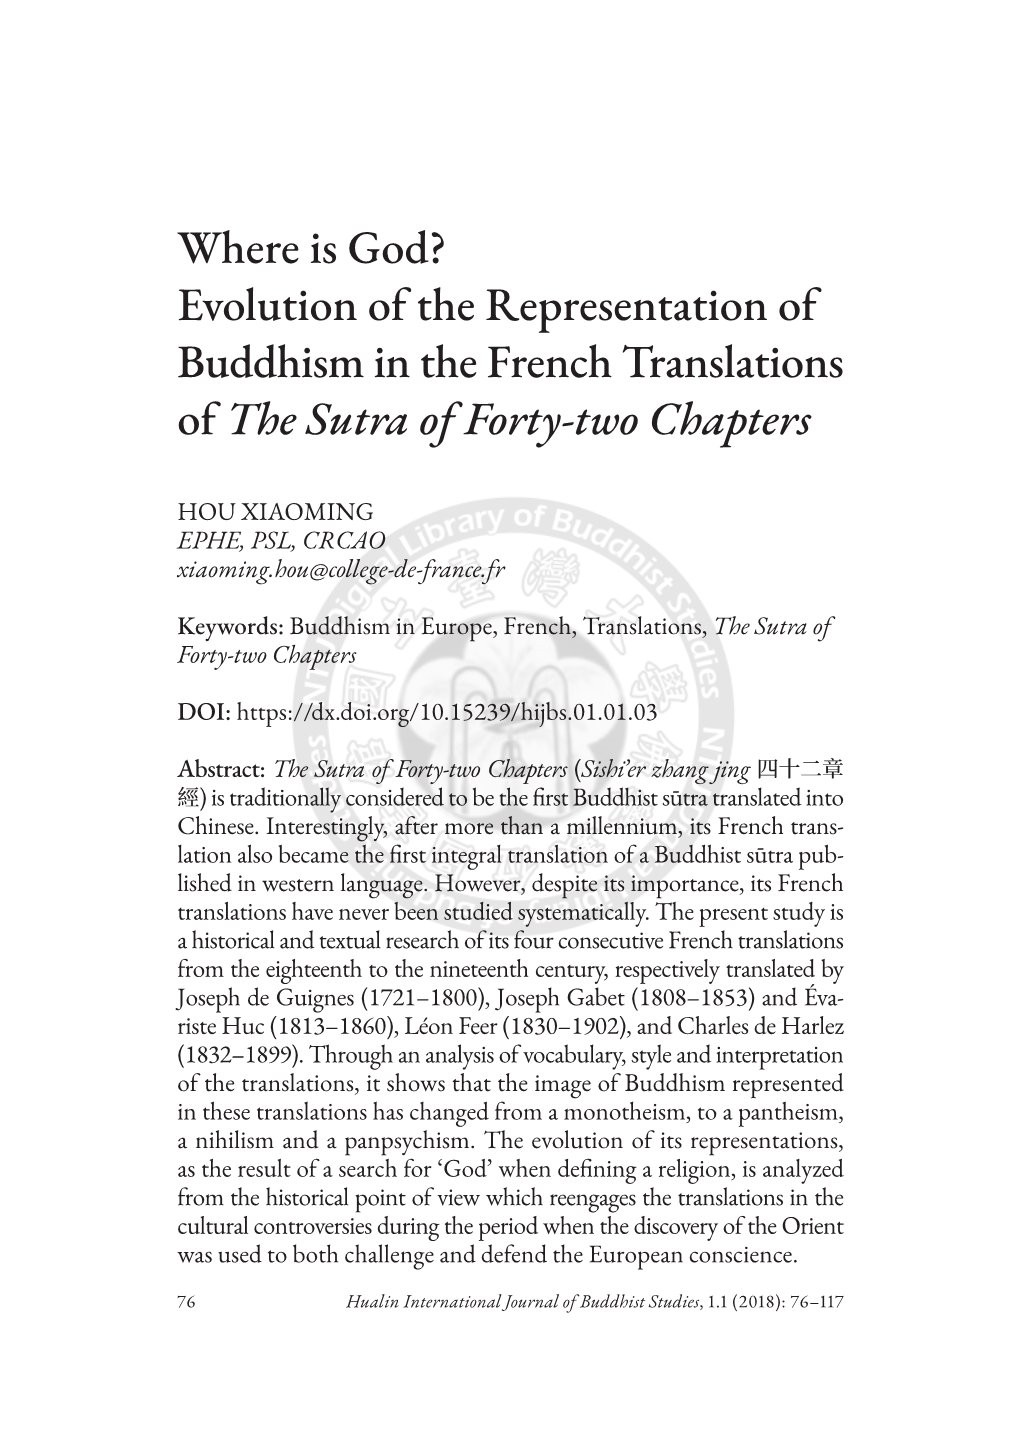 Evolution of the Representation of Buddhism in the French Translations of the Sutra of Forty-Two Chapters